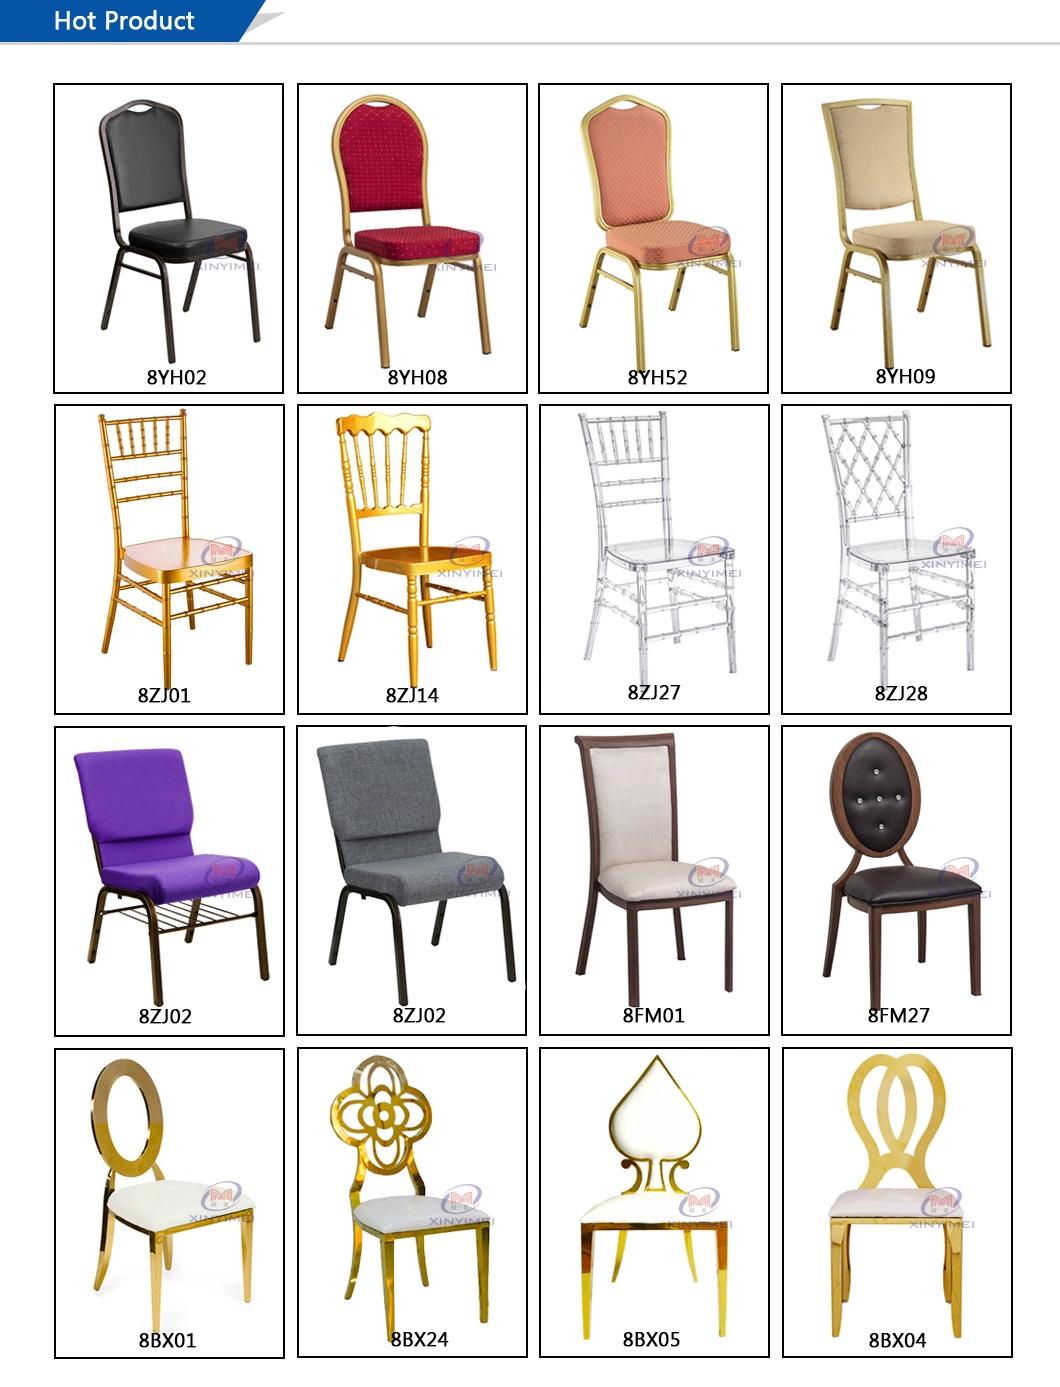 Hot Selling Used Stacking Plastic Chairs with Low Price